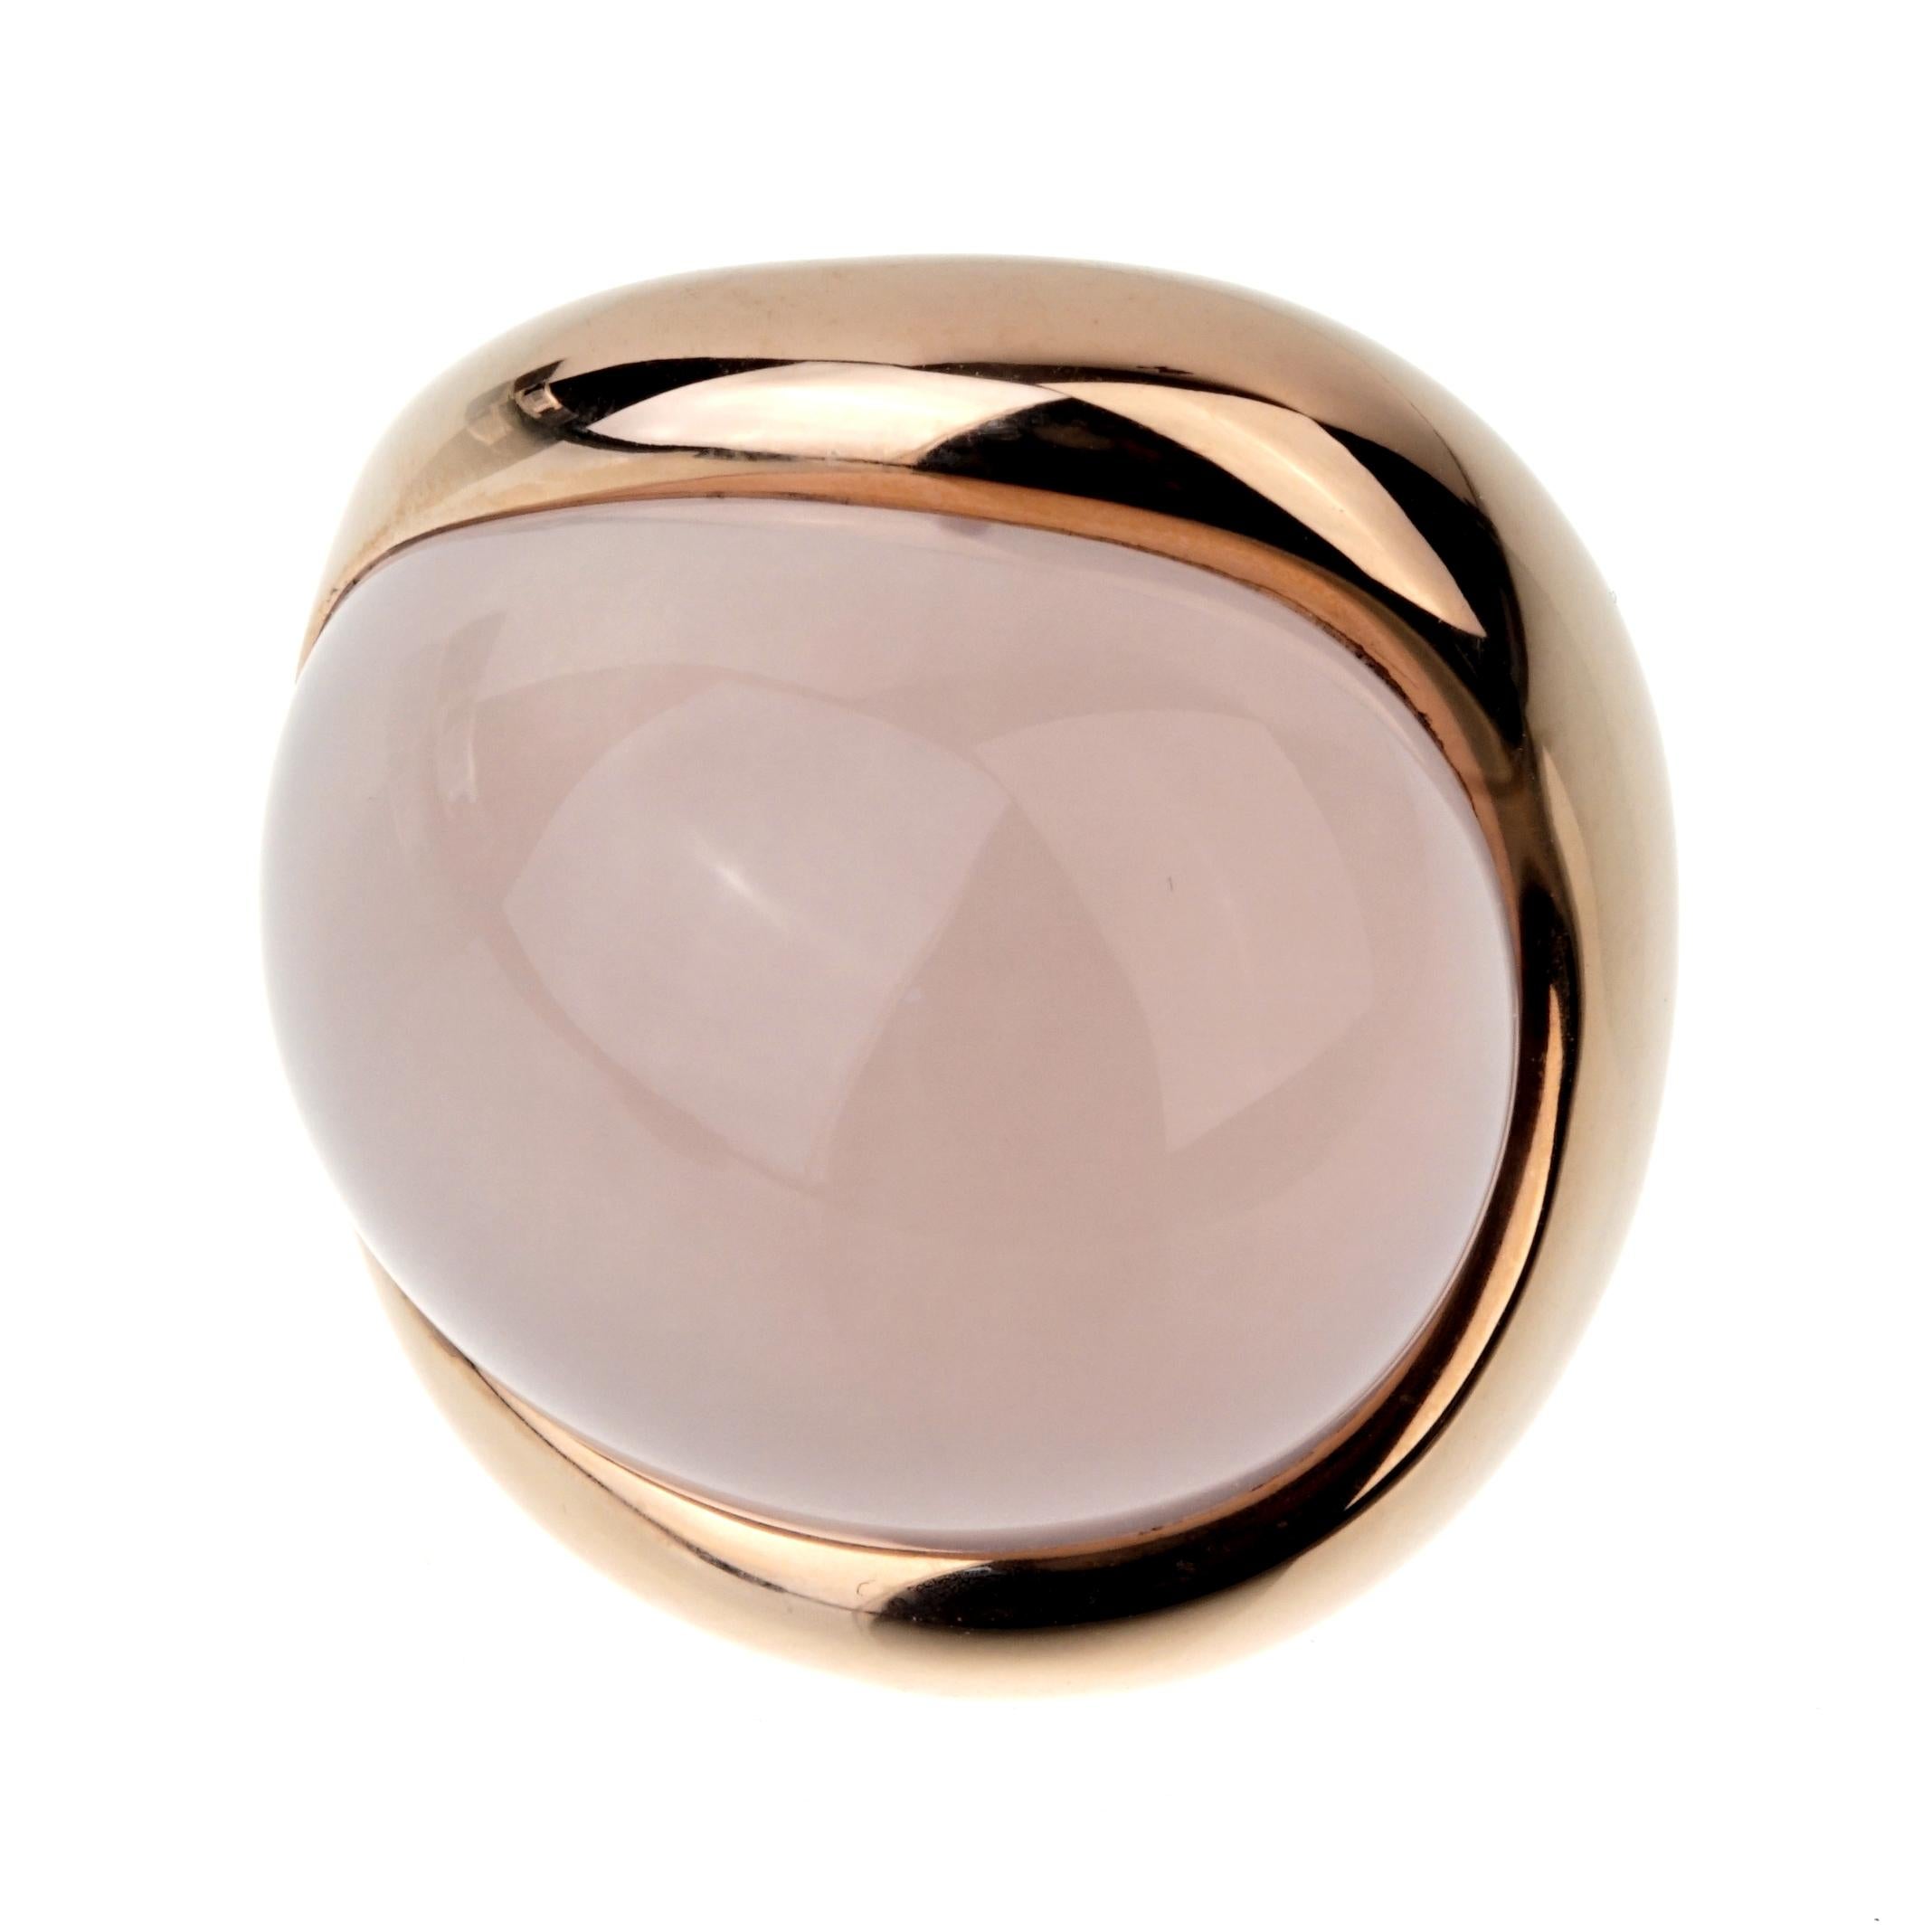 A stunning De Grisogono ring featuring a 79 Carat Cabochon cut Pink Quartz set in 18k rose gold. Adjustable size from US 5-6.

The ring has a weight of 29 grams.

Sku: 945